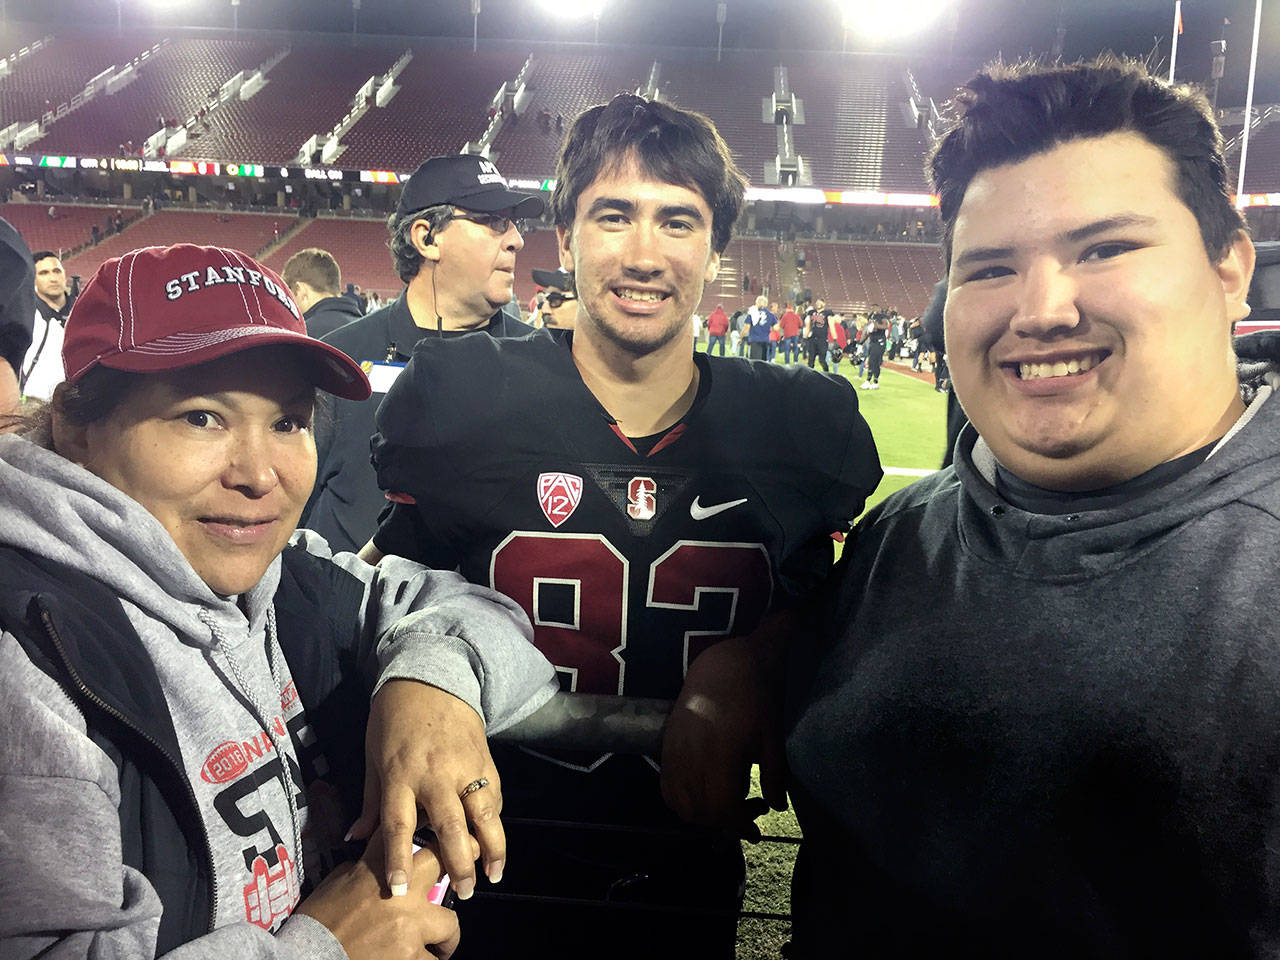 Maiya Buzzell Cameron Buzzell, center, a walk-on wide receiver with Stanford, visits with his friend Matt Reamer, right, and Reamer’s mom Carol, after a game against Oregon earlier this season.